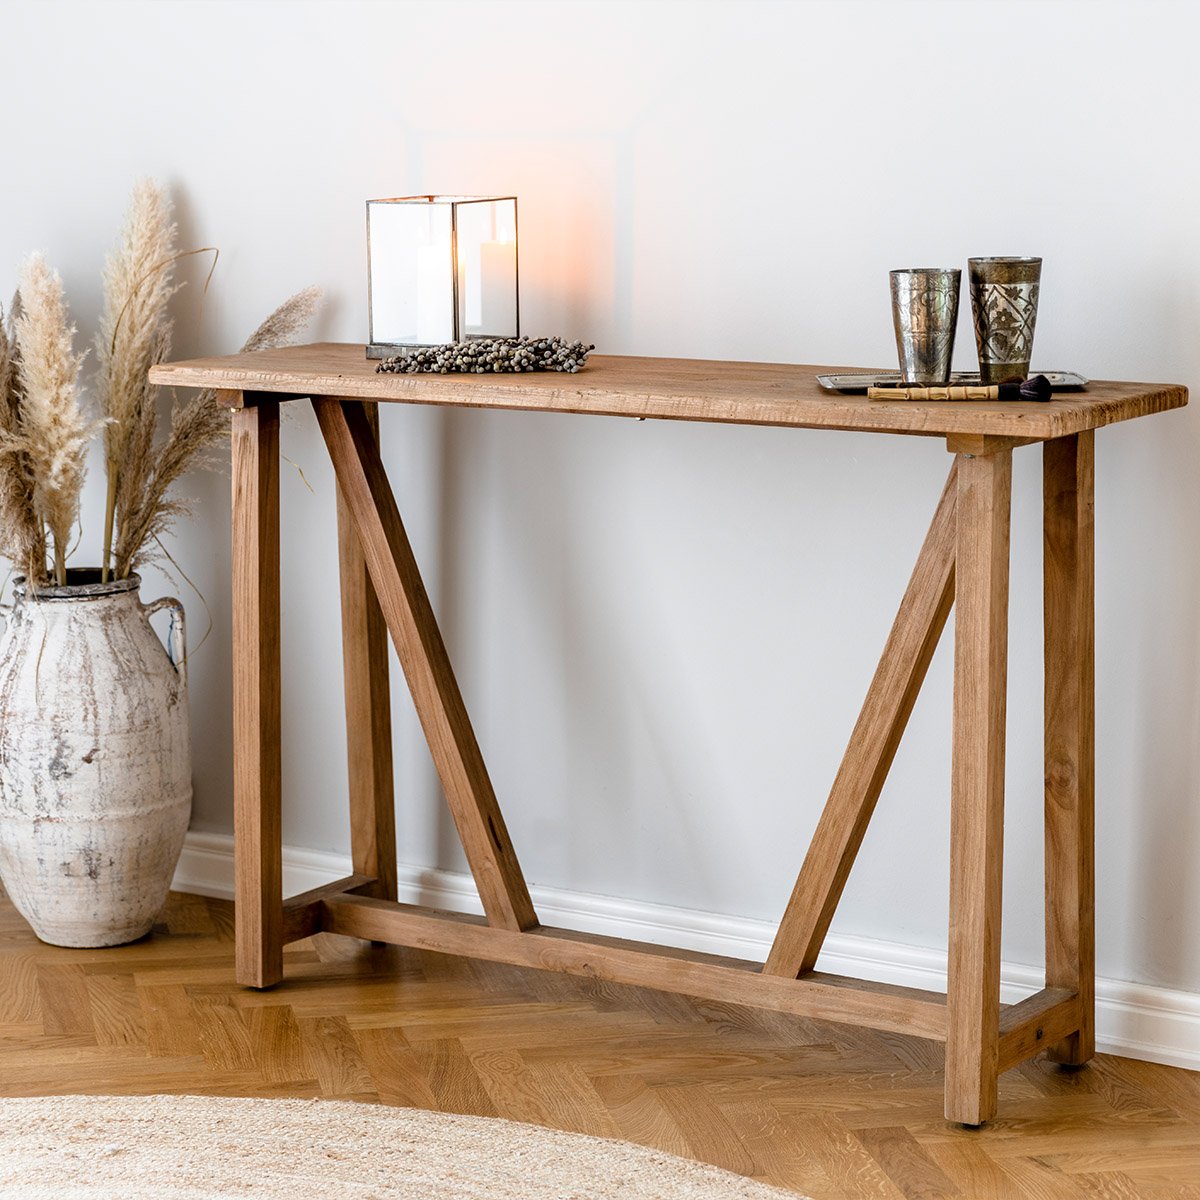 Lucas Teak Console by Sika